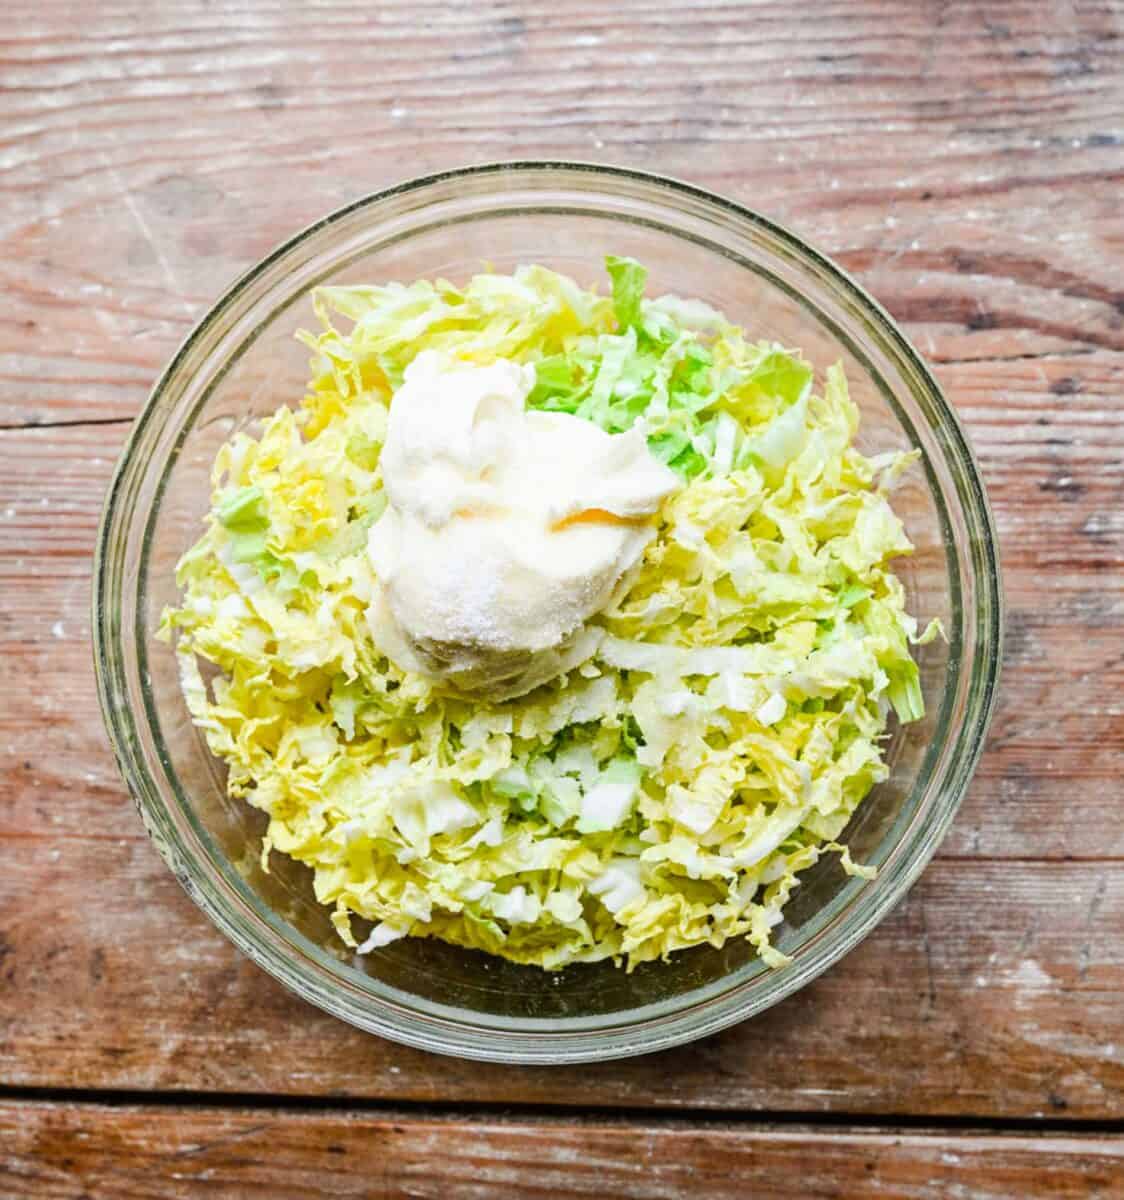 Cabbage in a bowl with mayonnaise, white vinegar, granulated sugar, and kosher salt.